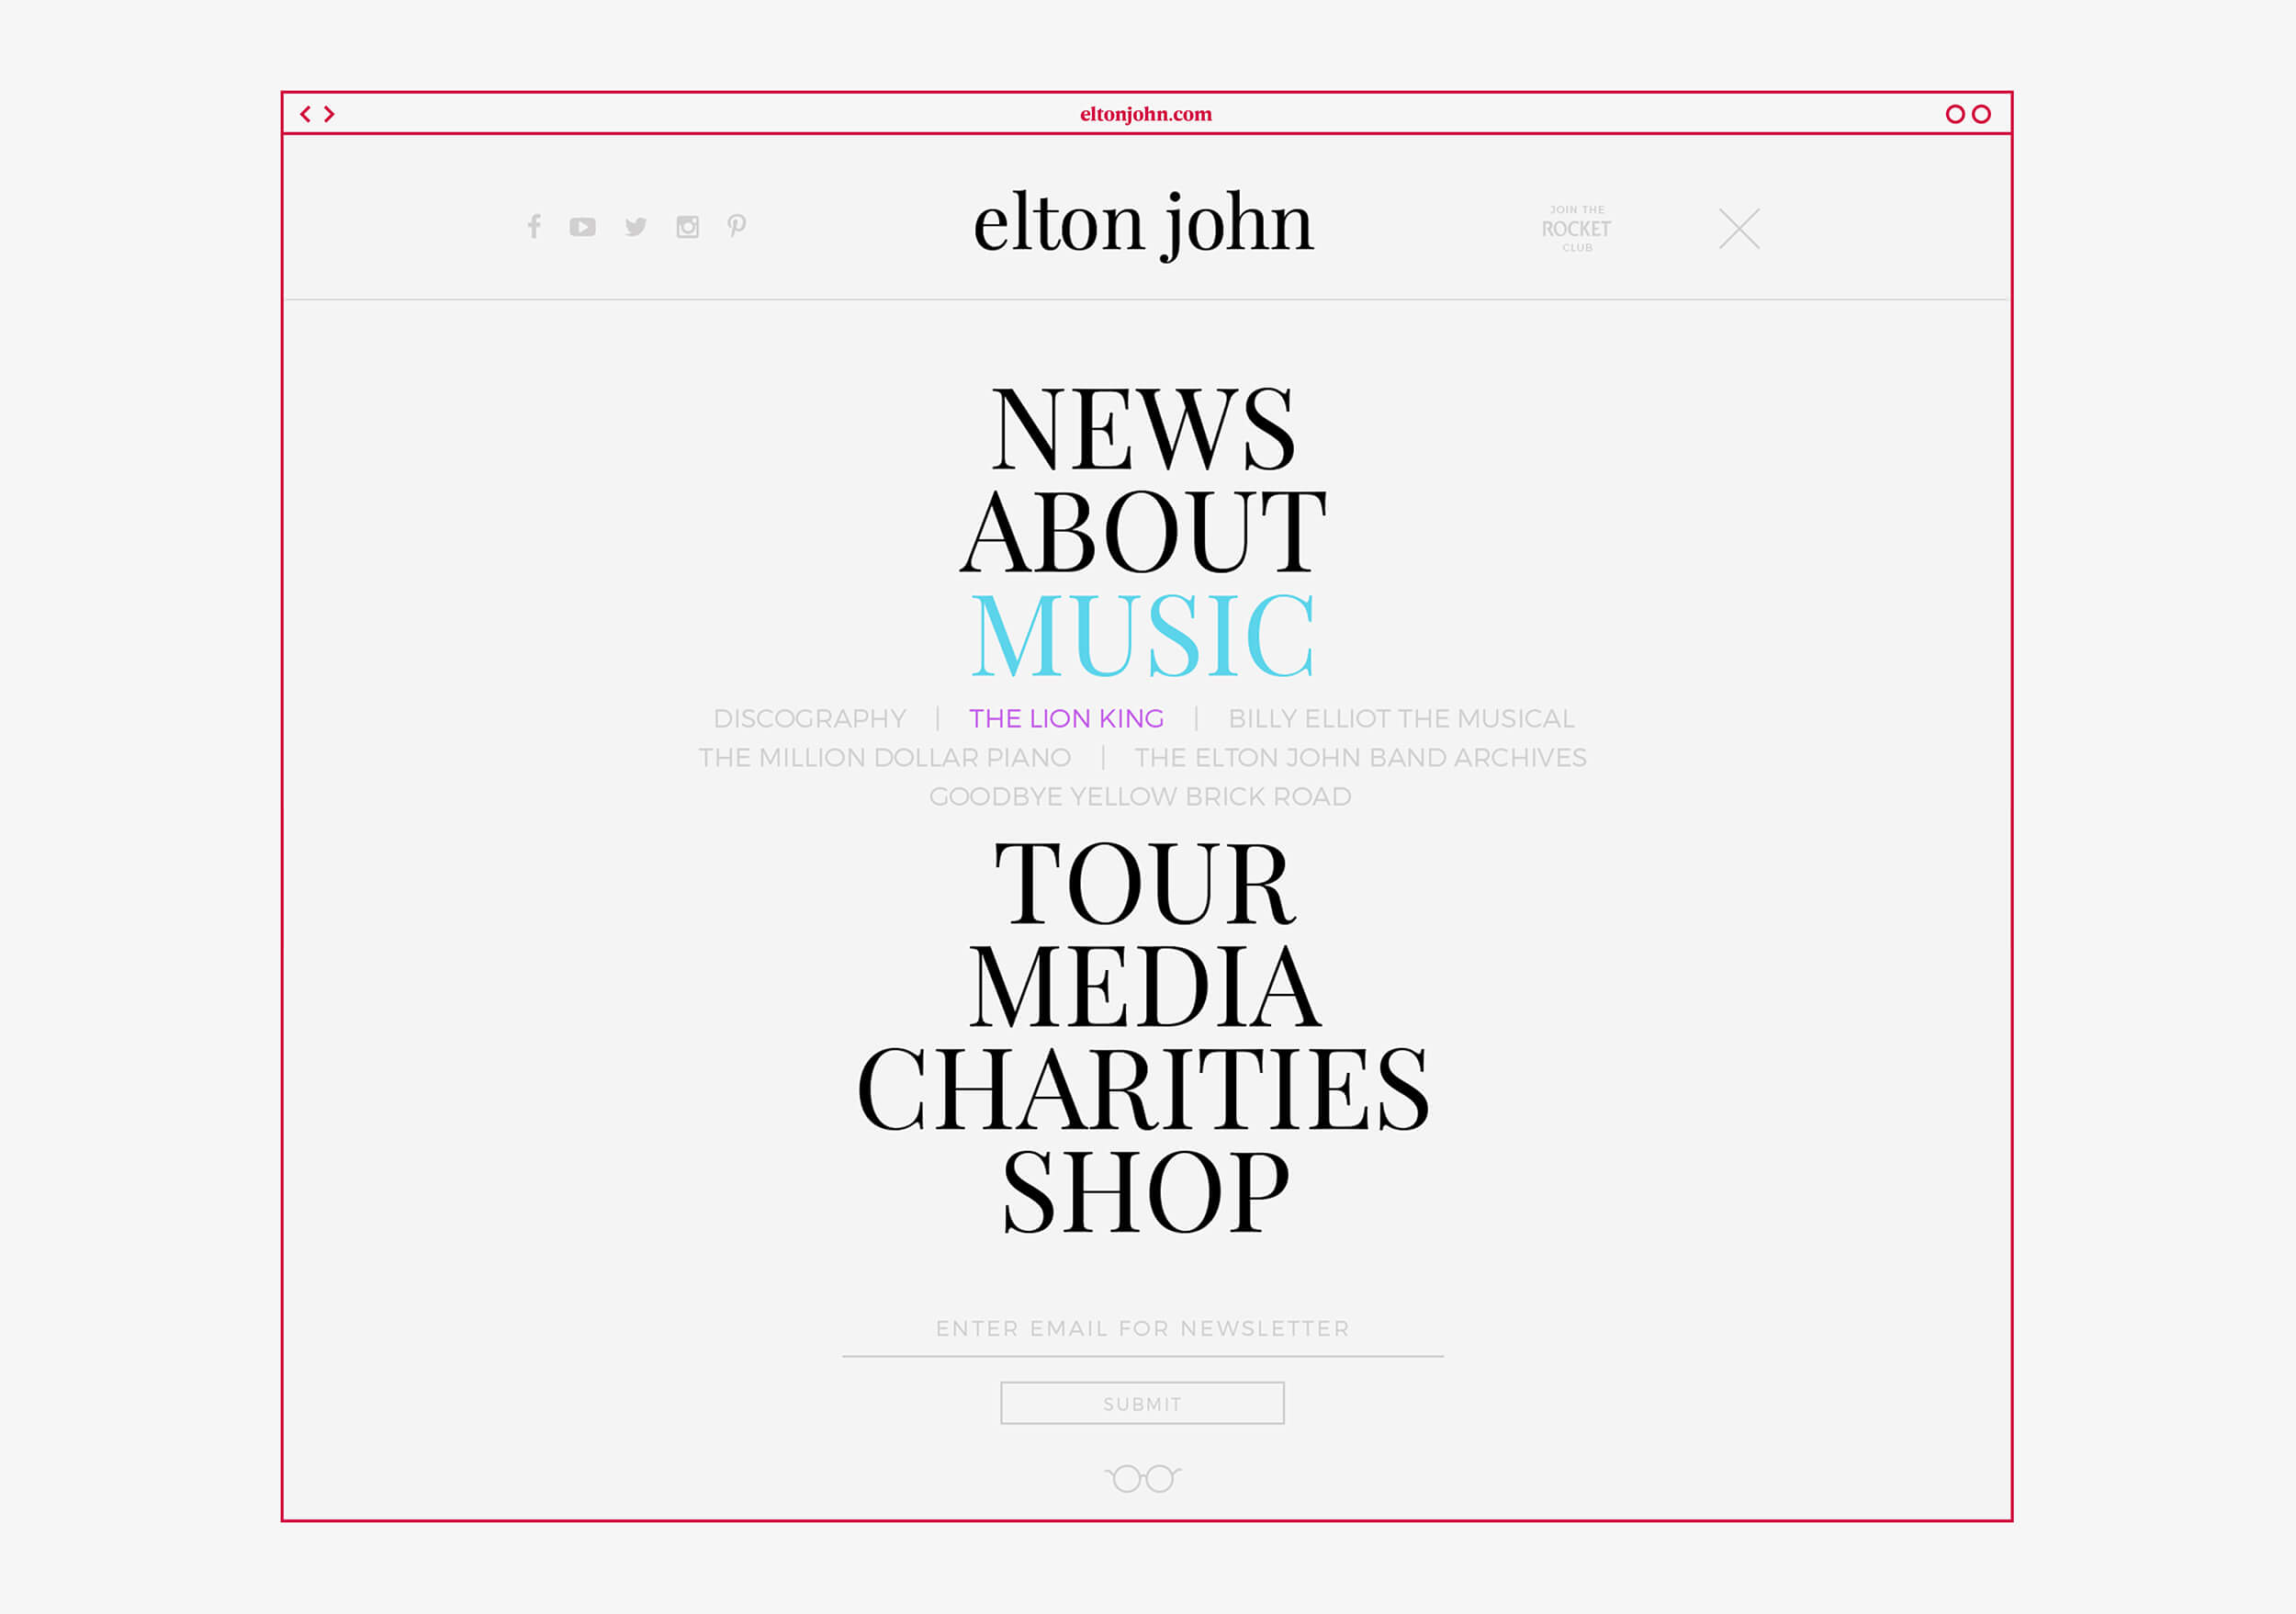 Takeover navigation menu system expanded and active for Elton John site design featuring expanded dropdown links and glasses icon